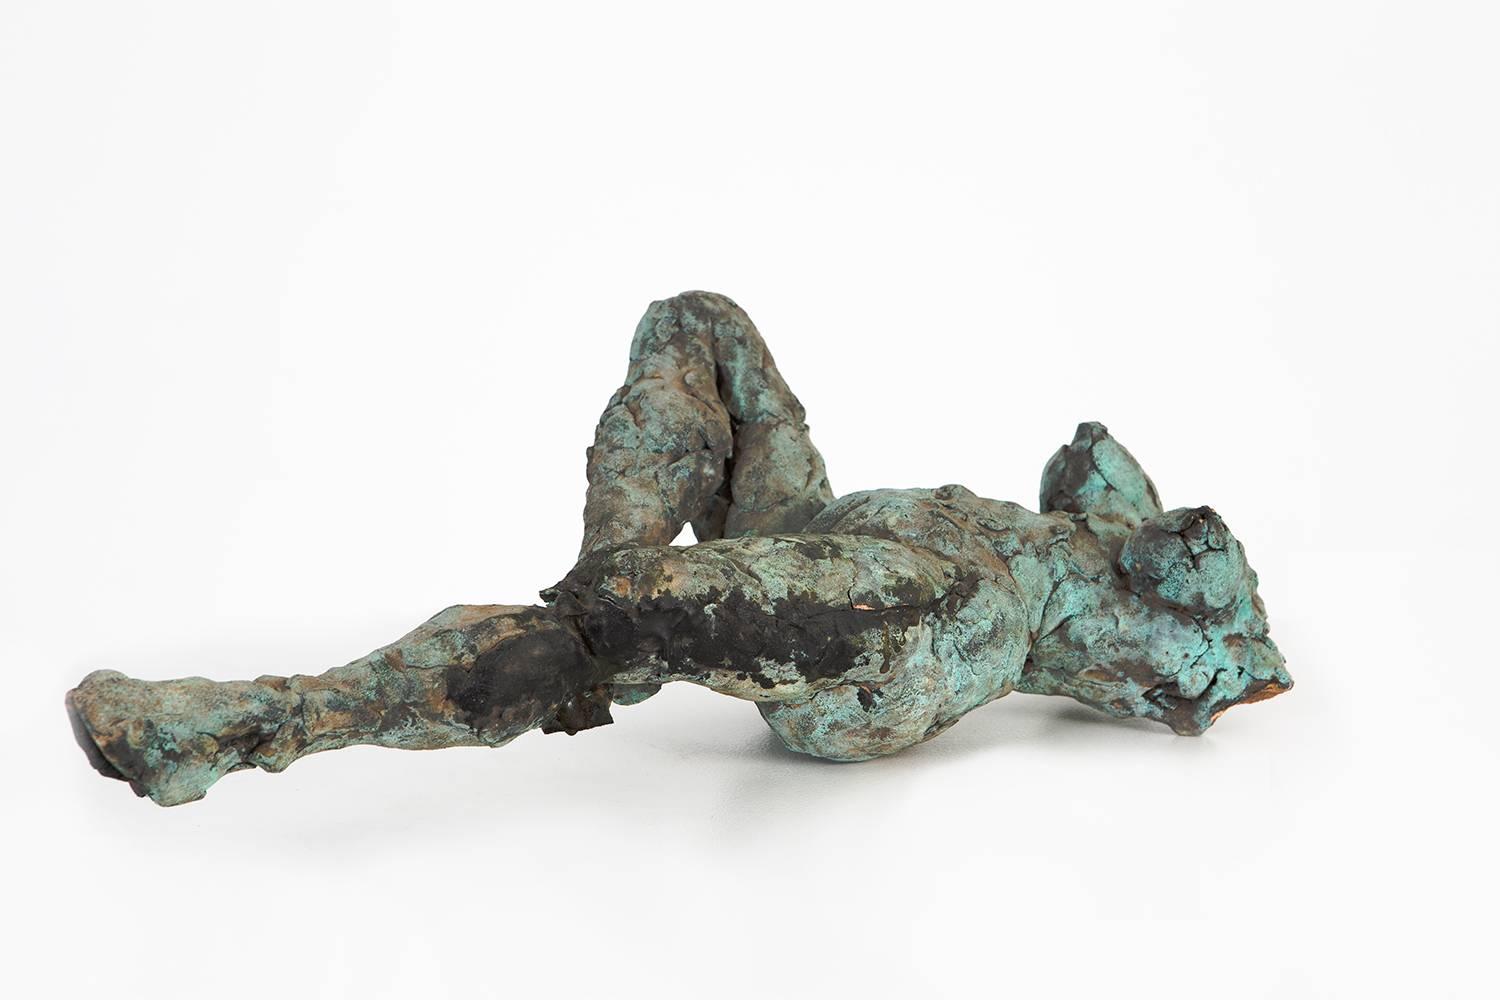 “Reclining” from 1985 is a patinated stoneware sculpture by Ruth Aizuss Migdal that depicts a reclining nude figure. The patina provides this piece with an exquisite range of color varying in greens and blues that contrast against the dark brown